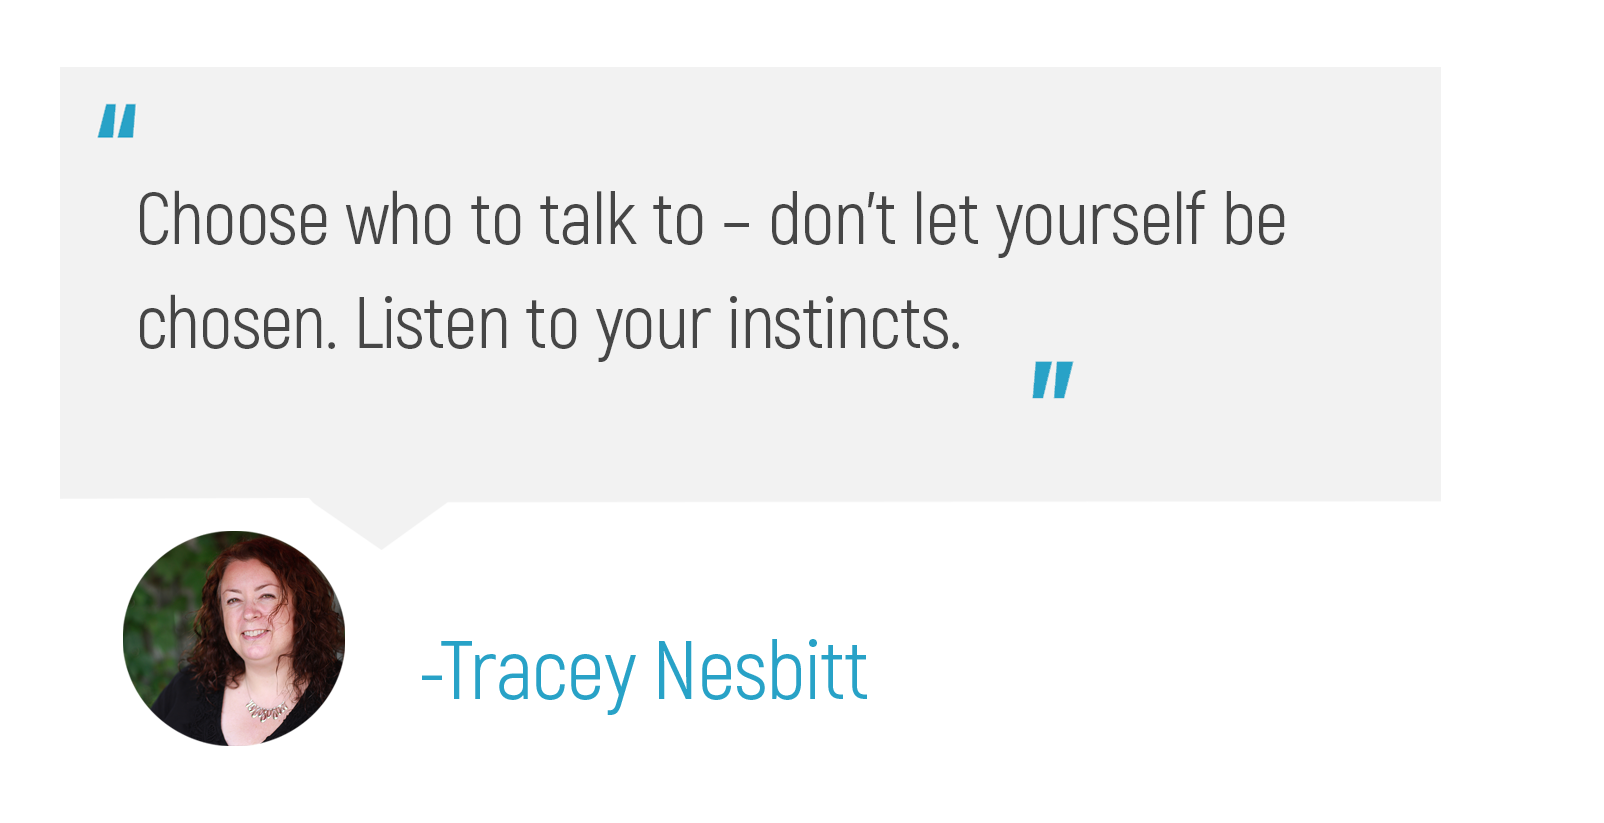 "Choose who to talk to - don't let yourself be chosen. Listen to your instincts."